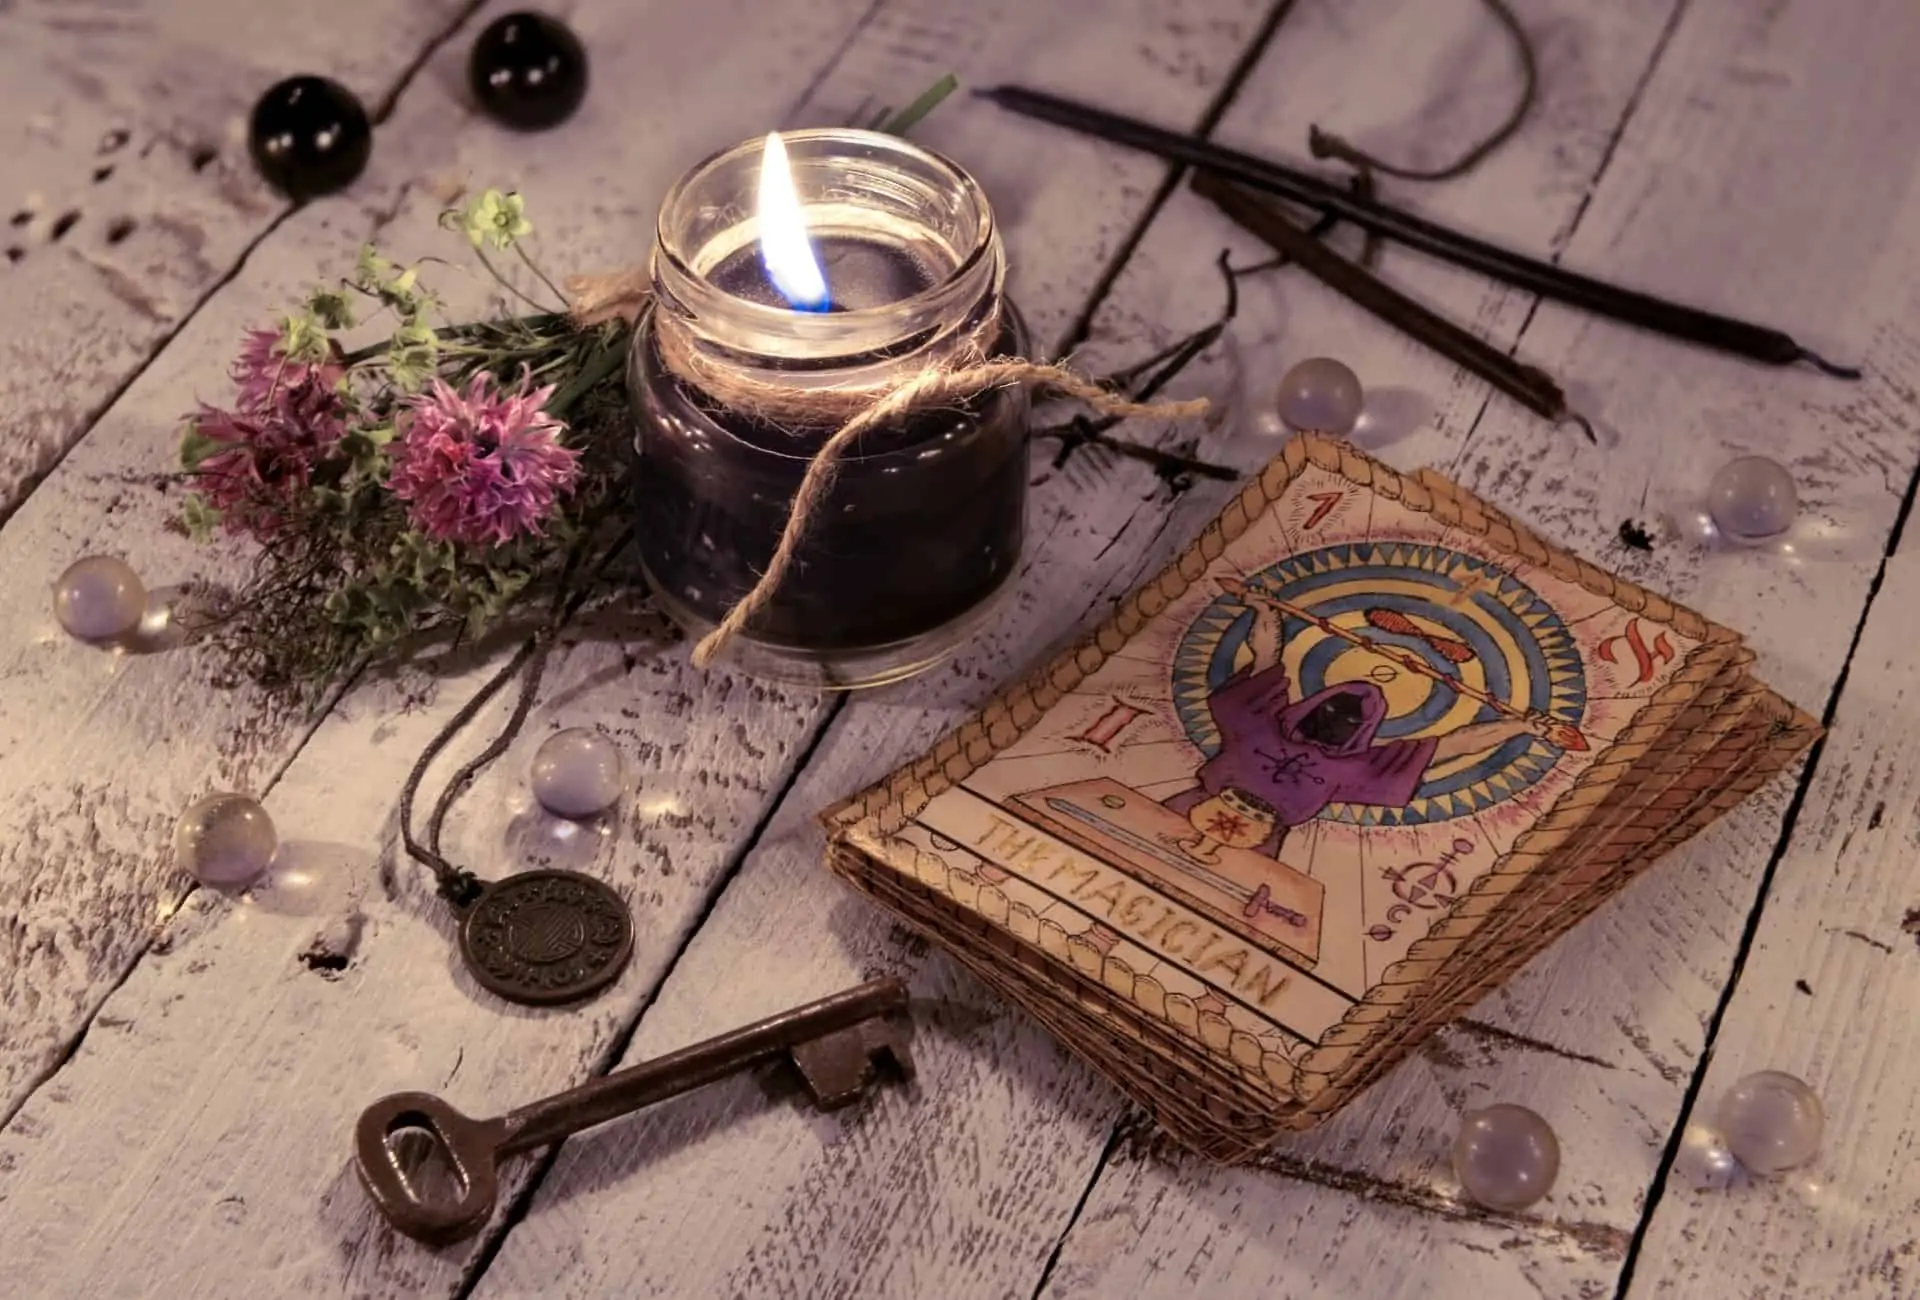 A candle burns on a table with tarot cards, flowers, and a key. - Witchcore